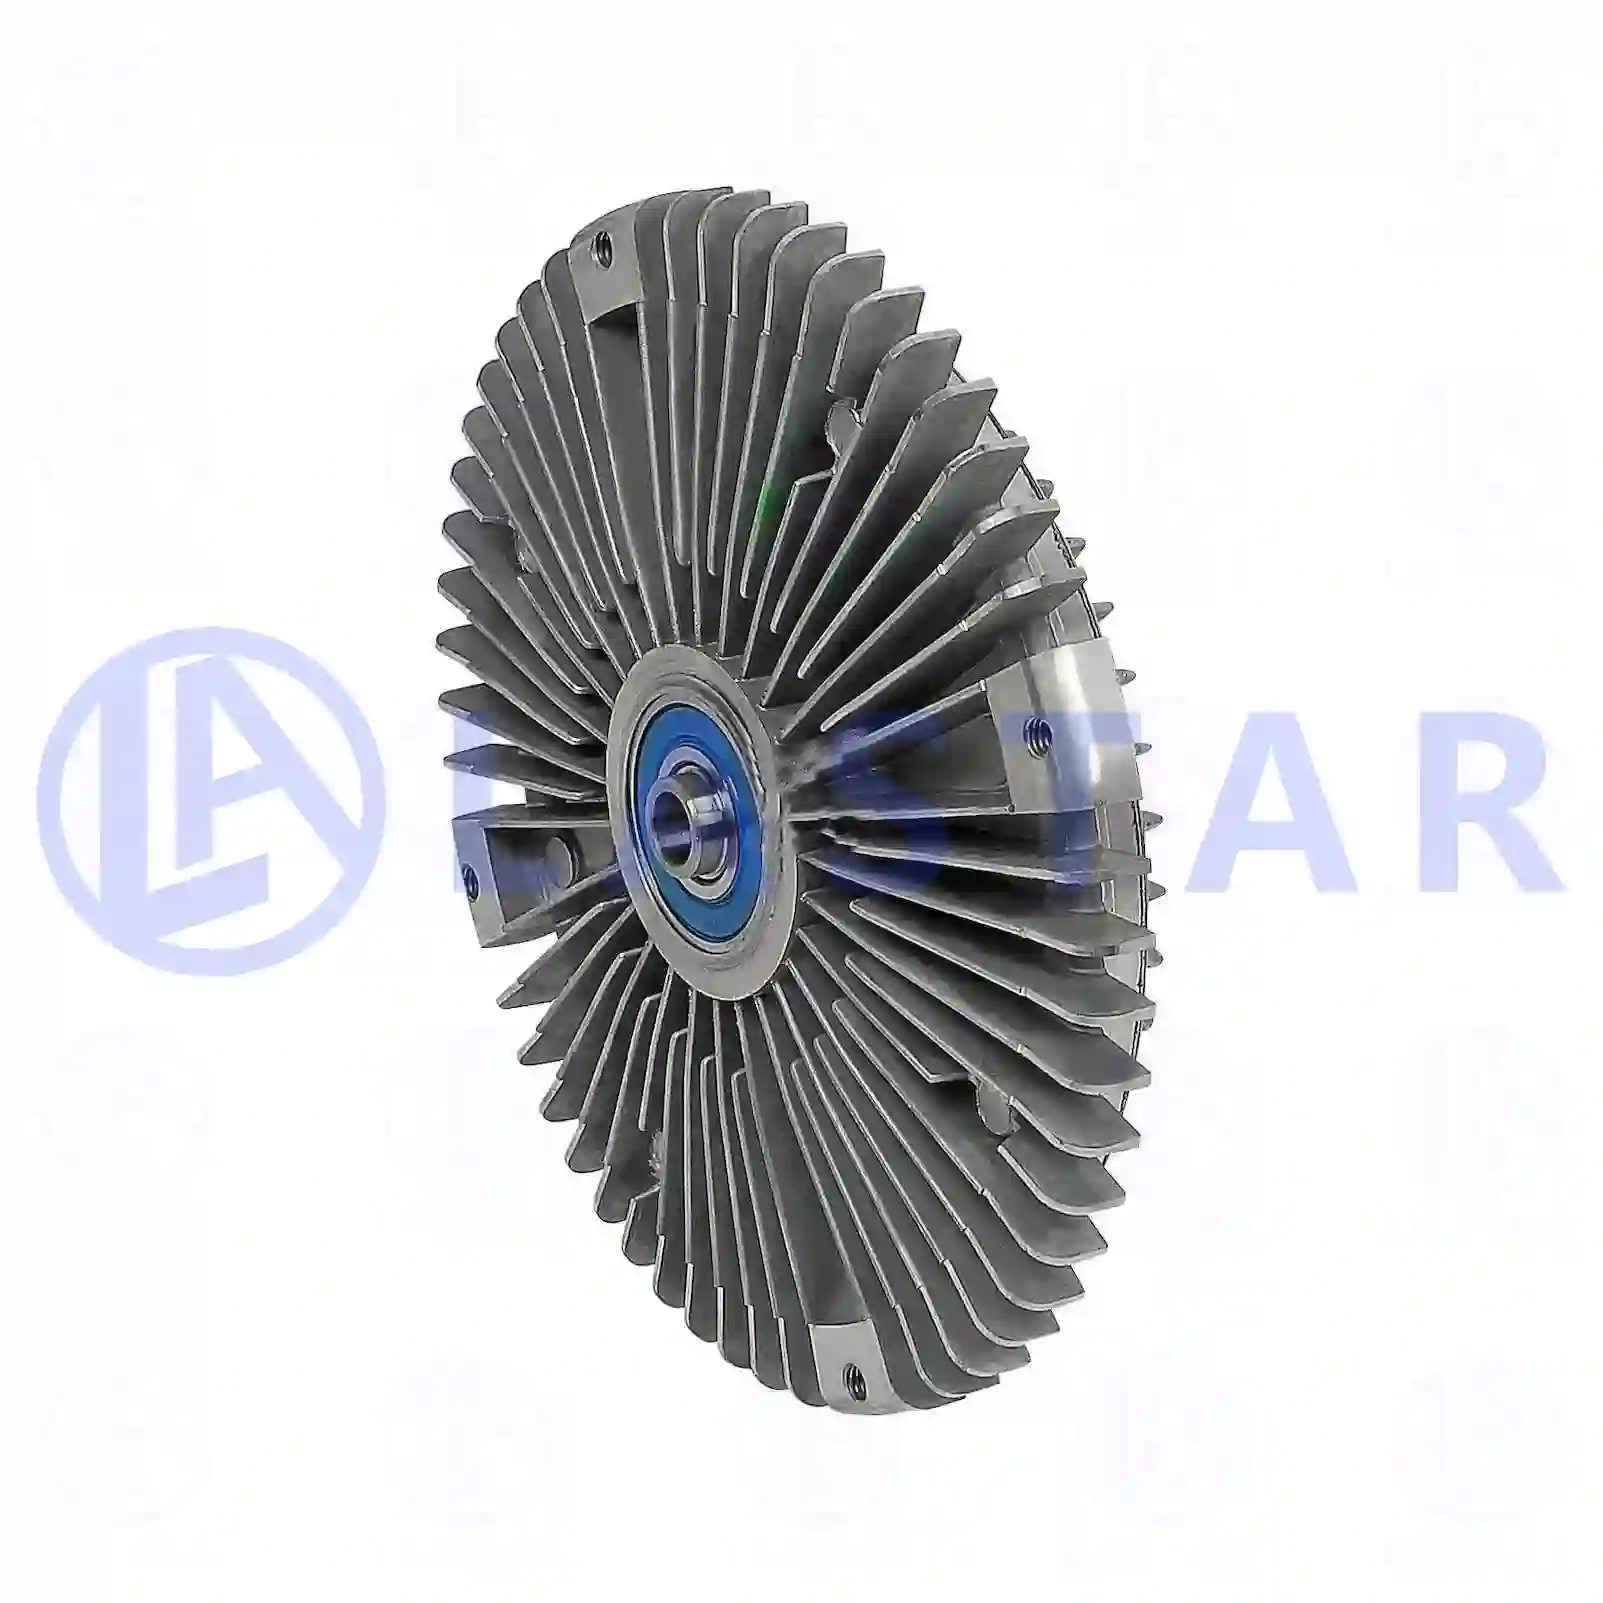 Fan clutch, 77708089, 2003822 ||  77708089 Lastar Spare Part | Truck Spare Parts, Auotomotive Spare Parts Fan clutch, 77708089, 2003822 ||  77708089 Lastar Spare Part | Truck Spare Parts, Auotomotive Spare Parts